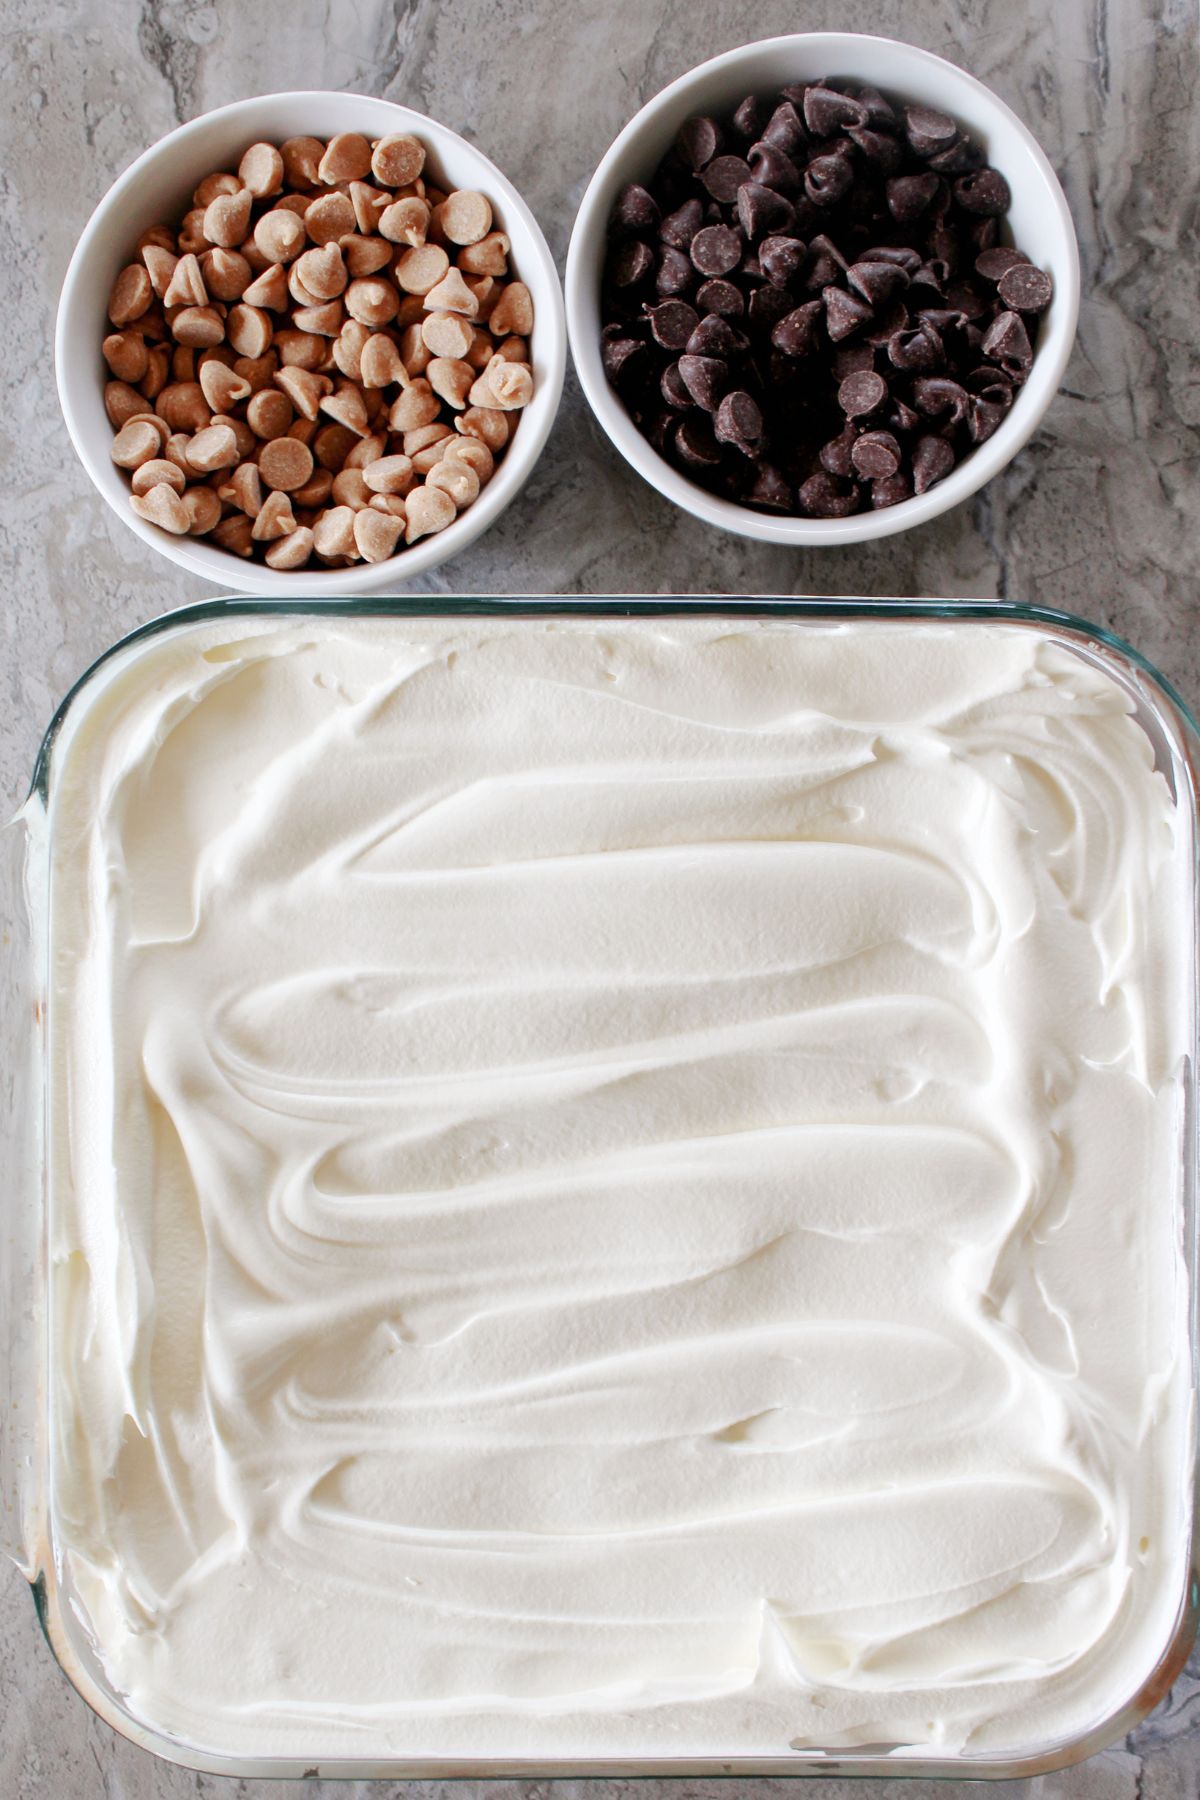 whipped topping spread on top